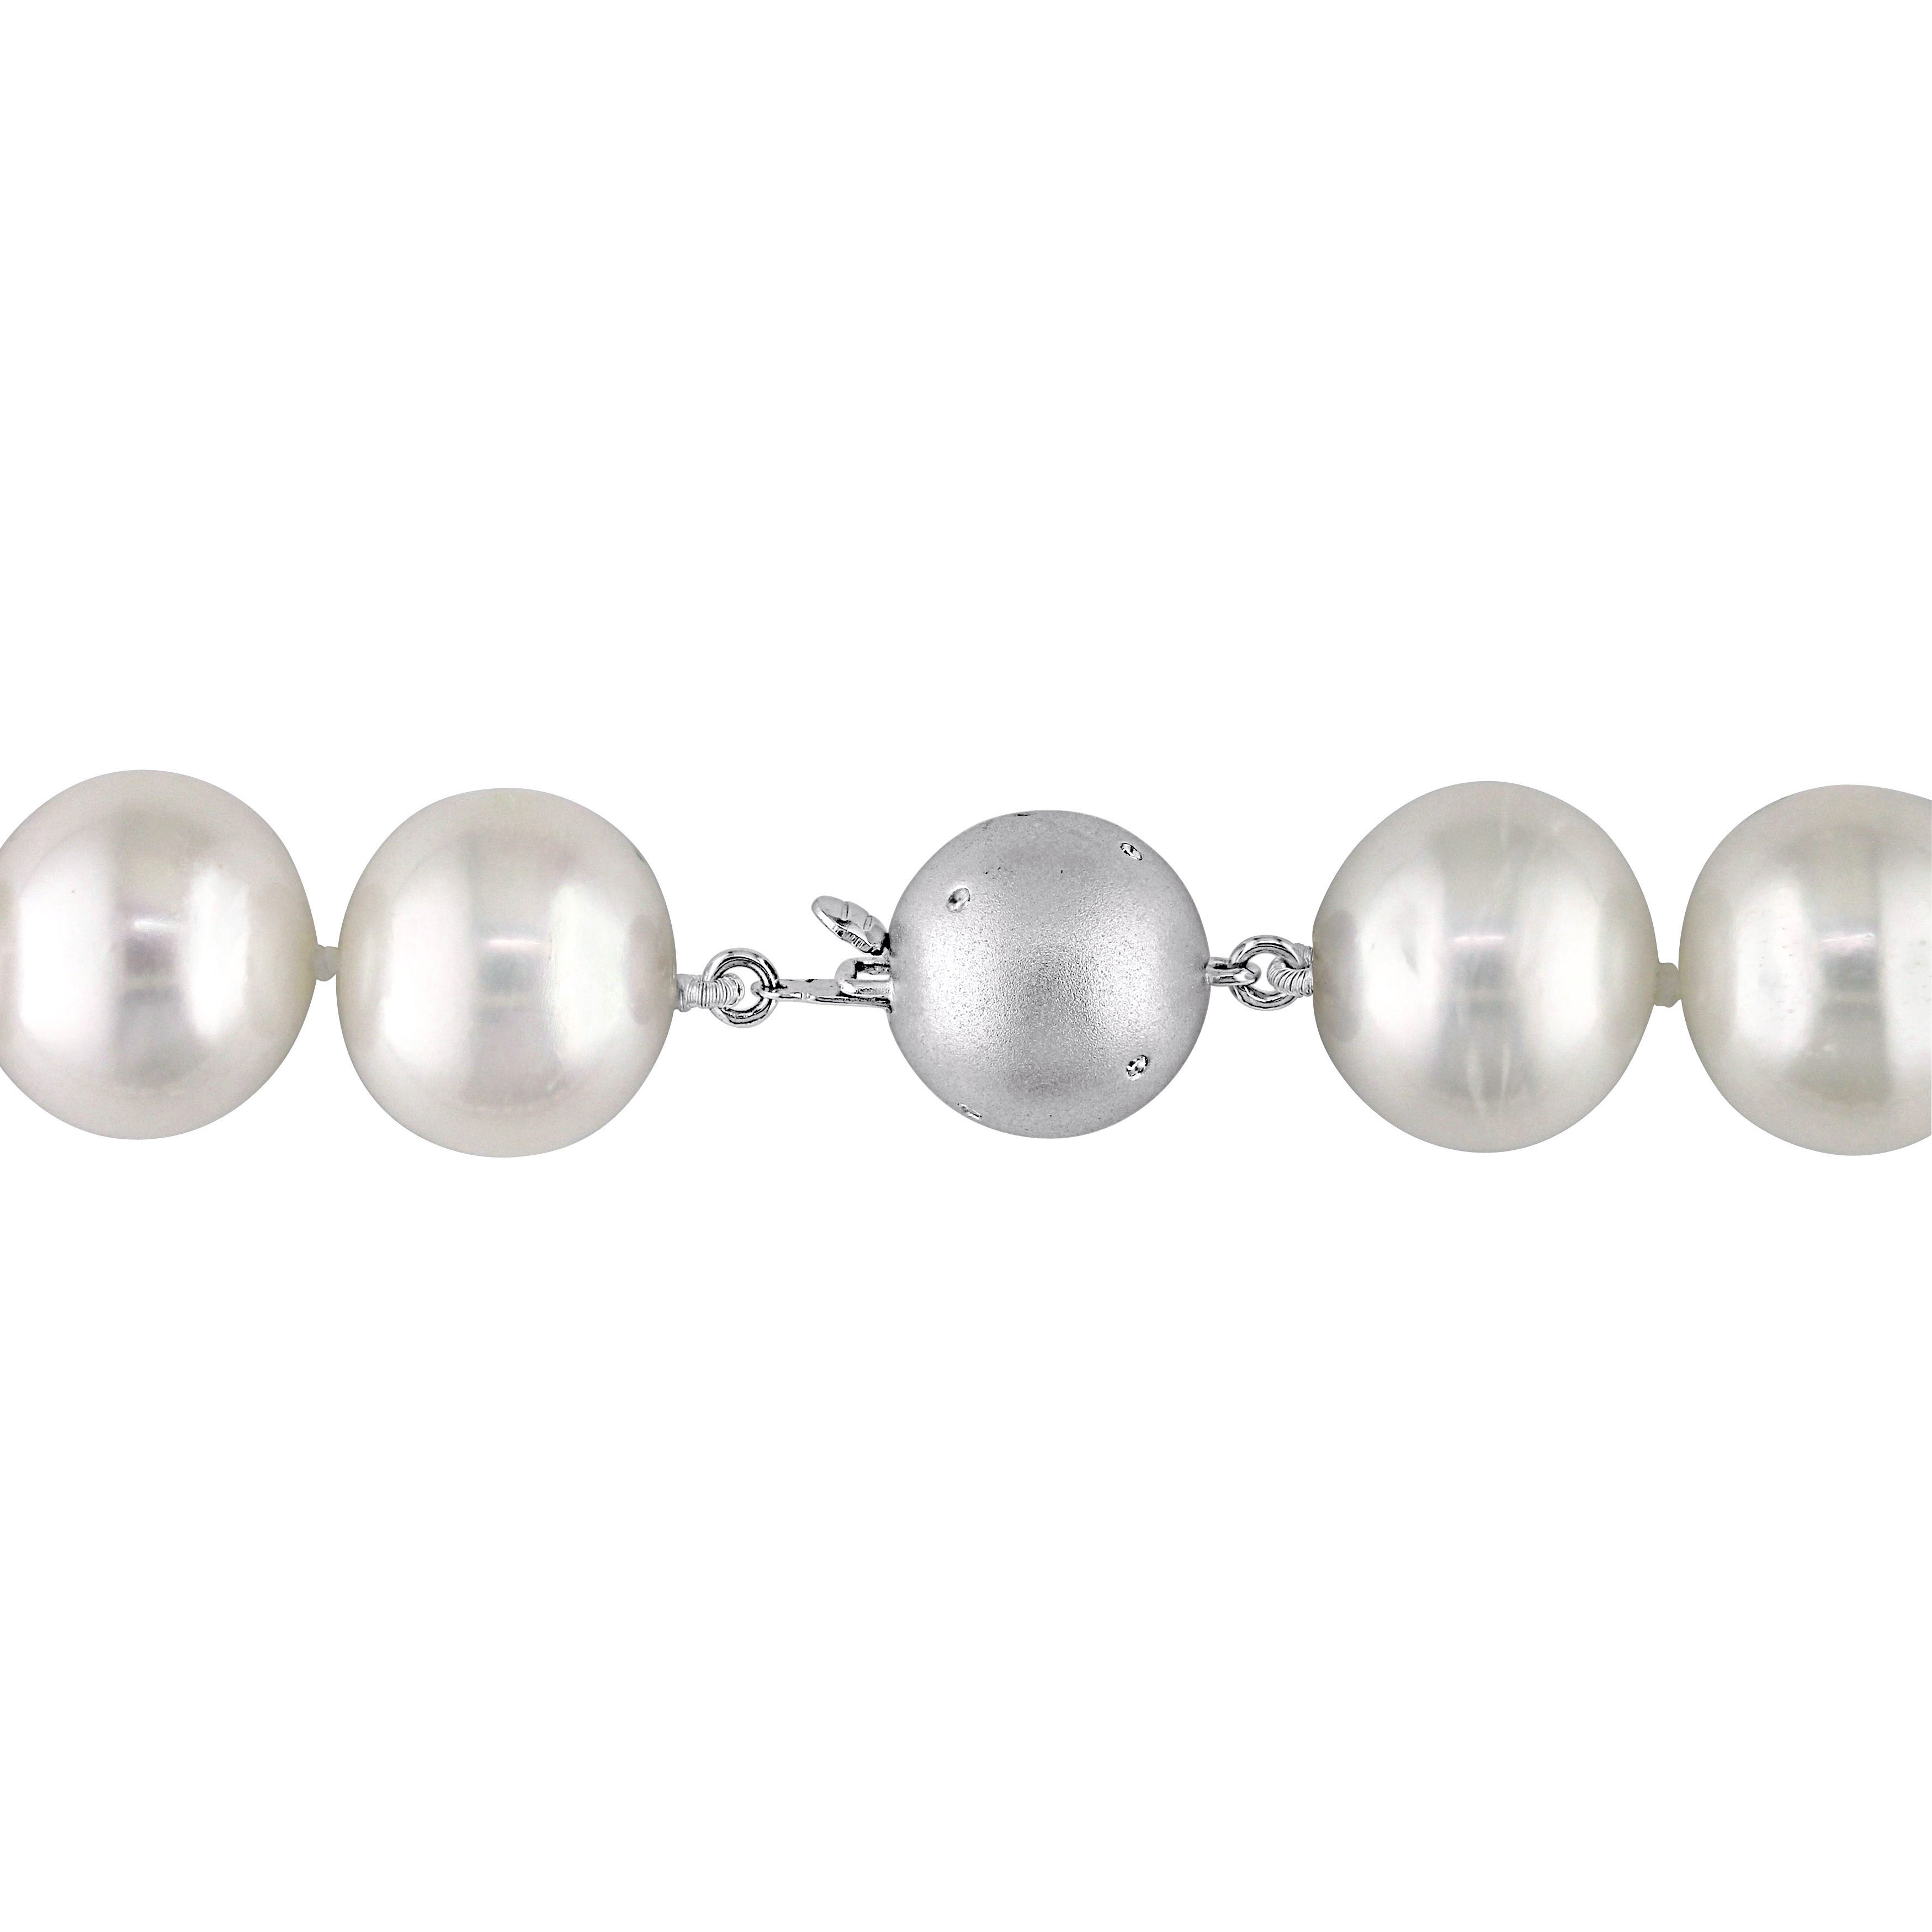 13.5-15 MM Freshwater cultured Pearl Necklace with 14k White Gold Diamond Accent Ball Clasp - 18 in